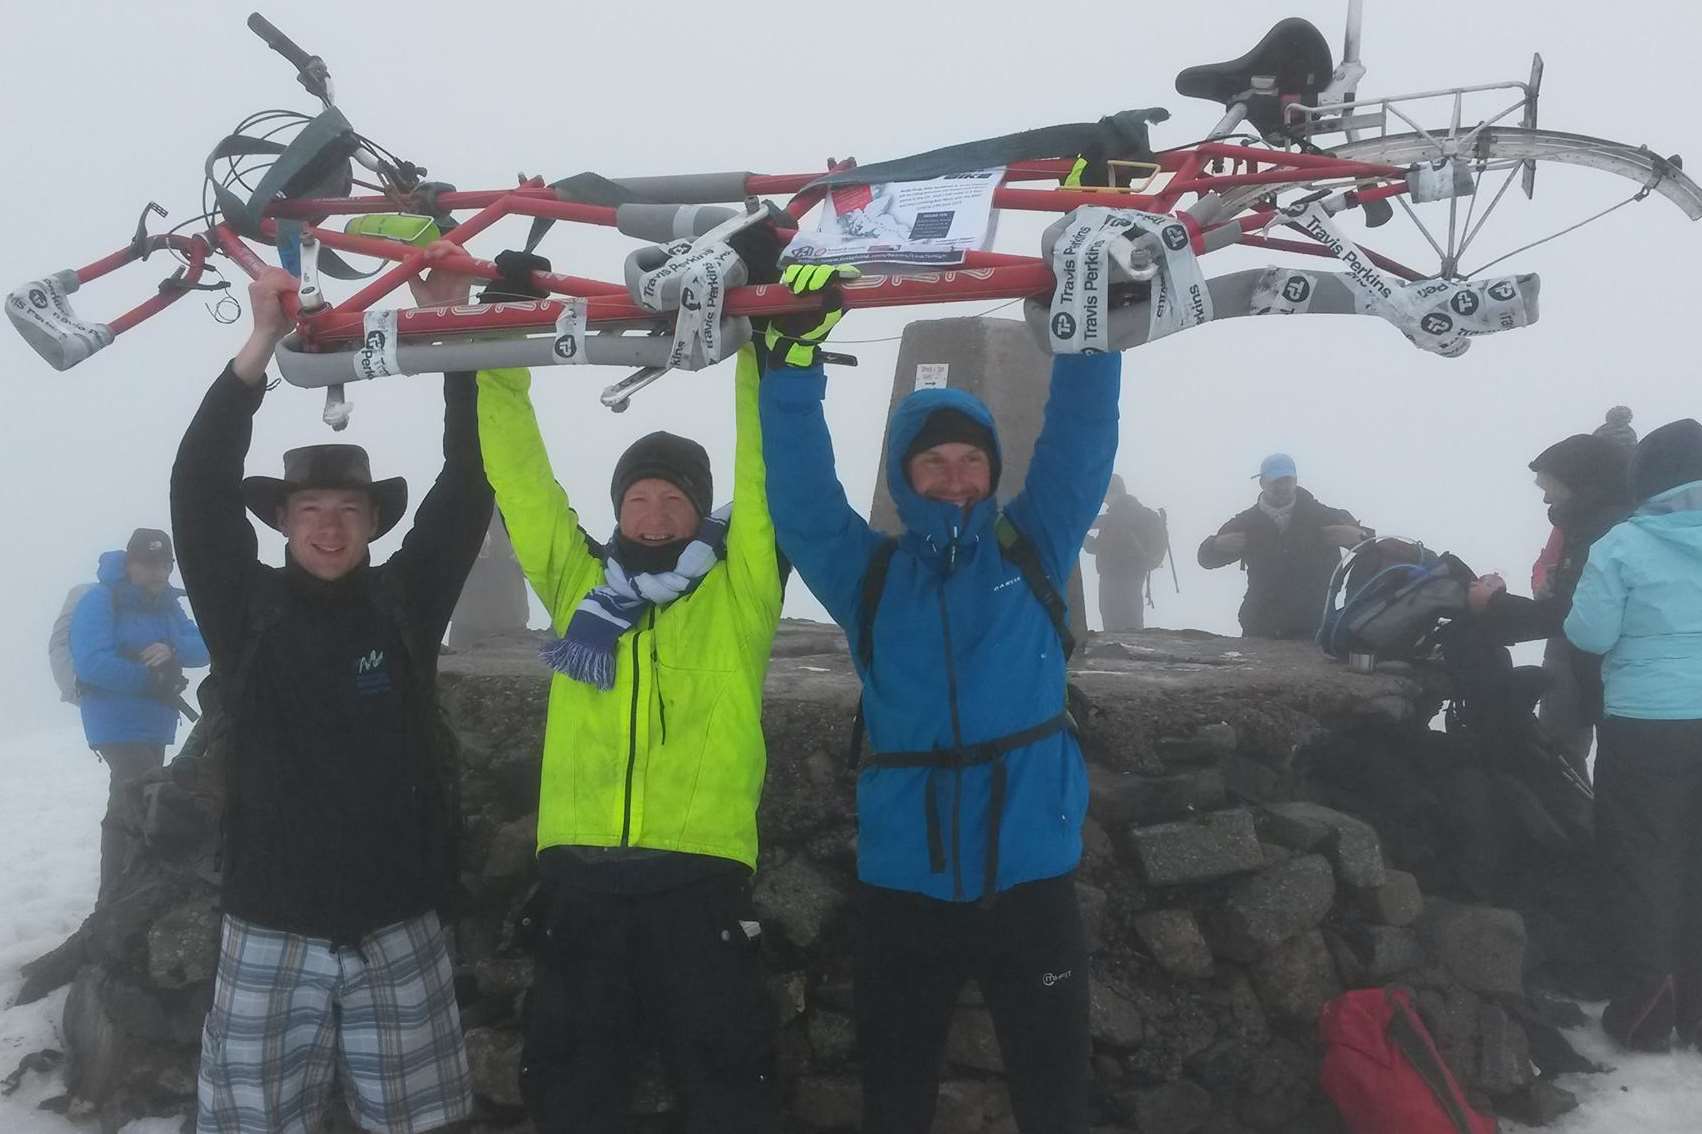 The trio at the summit of Ben Nevis.